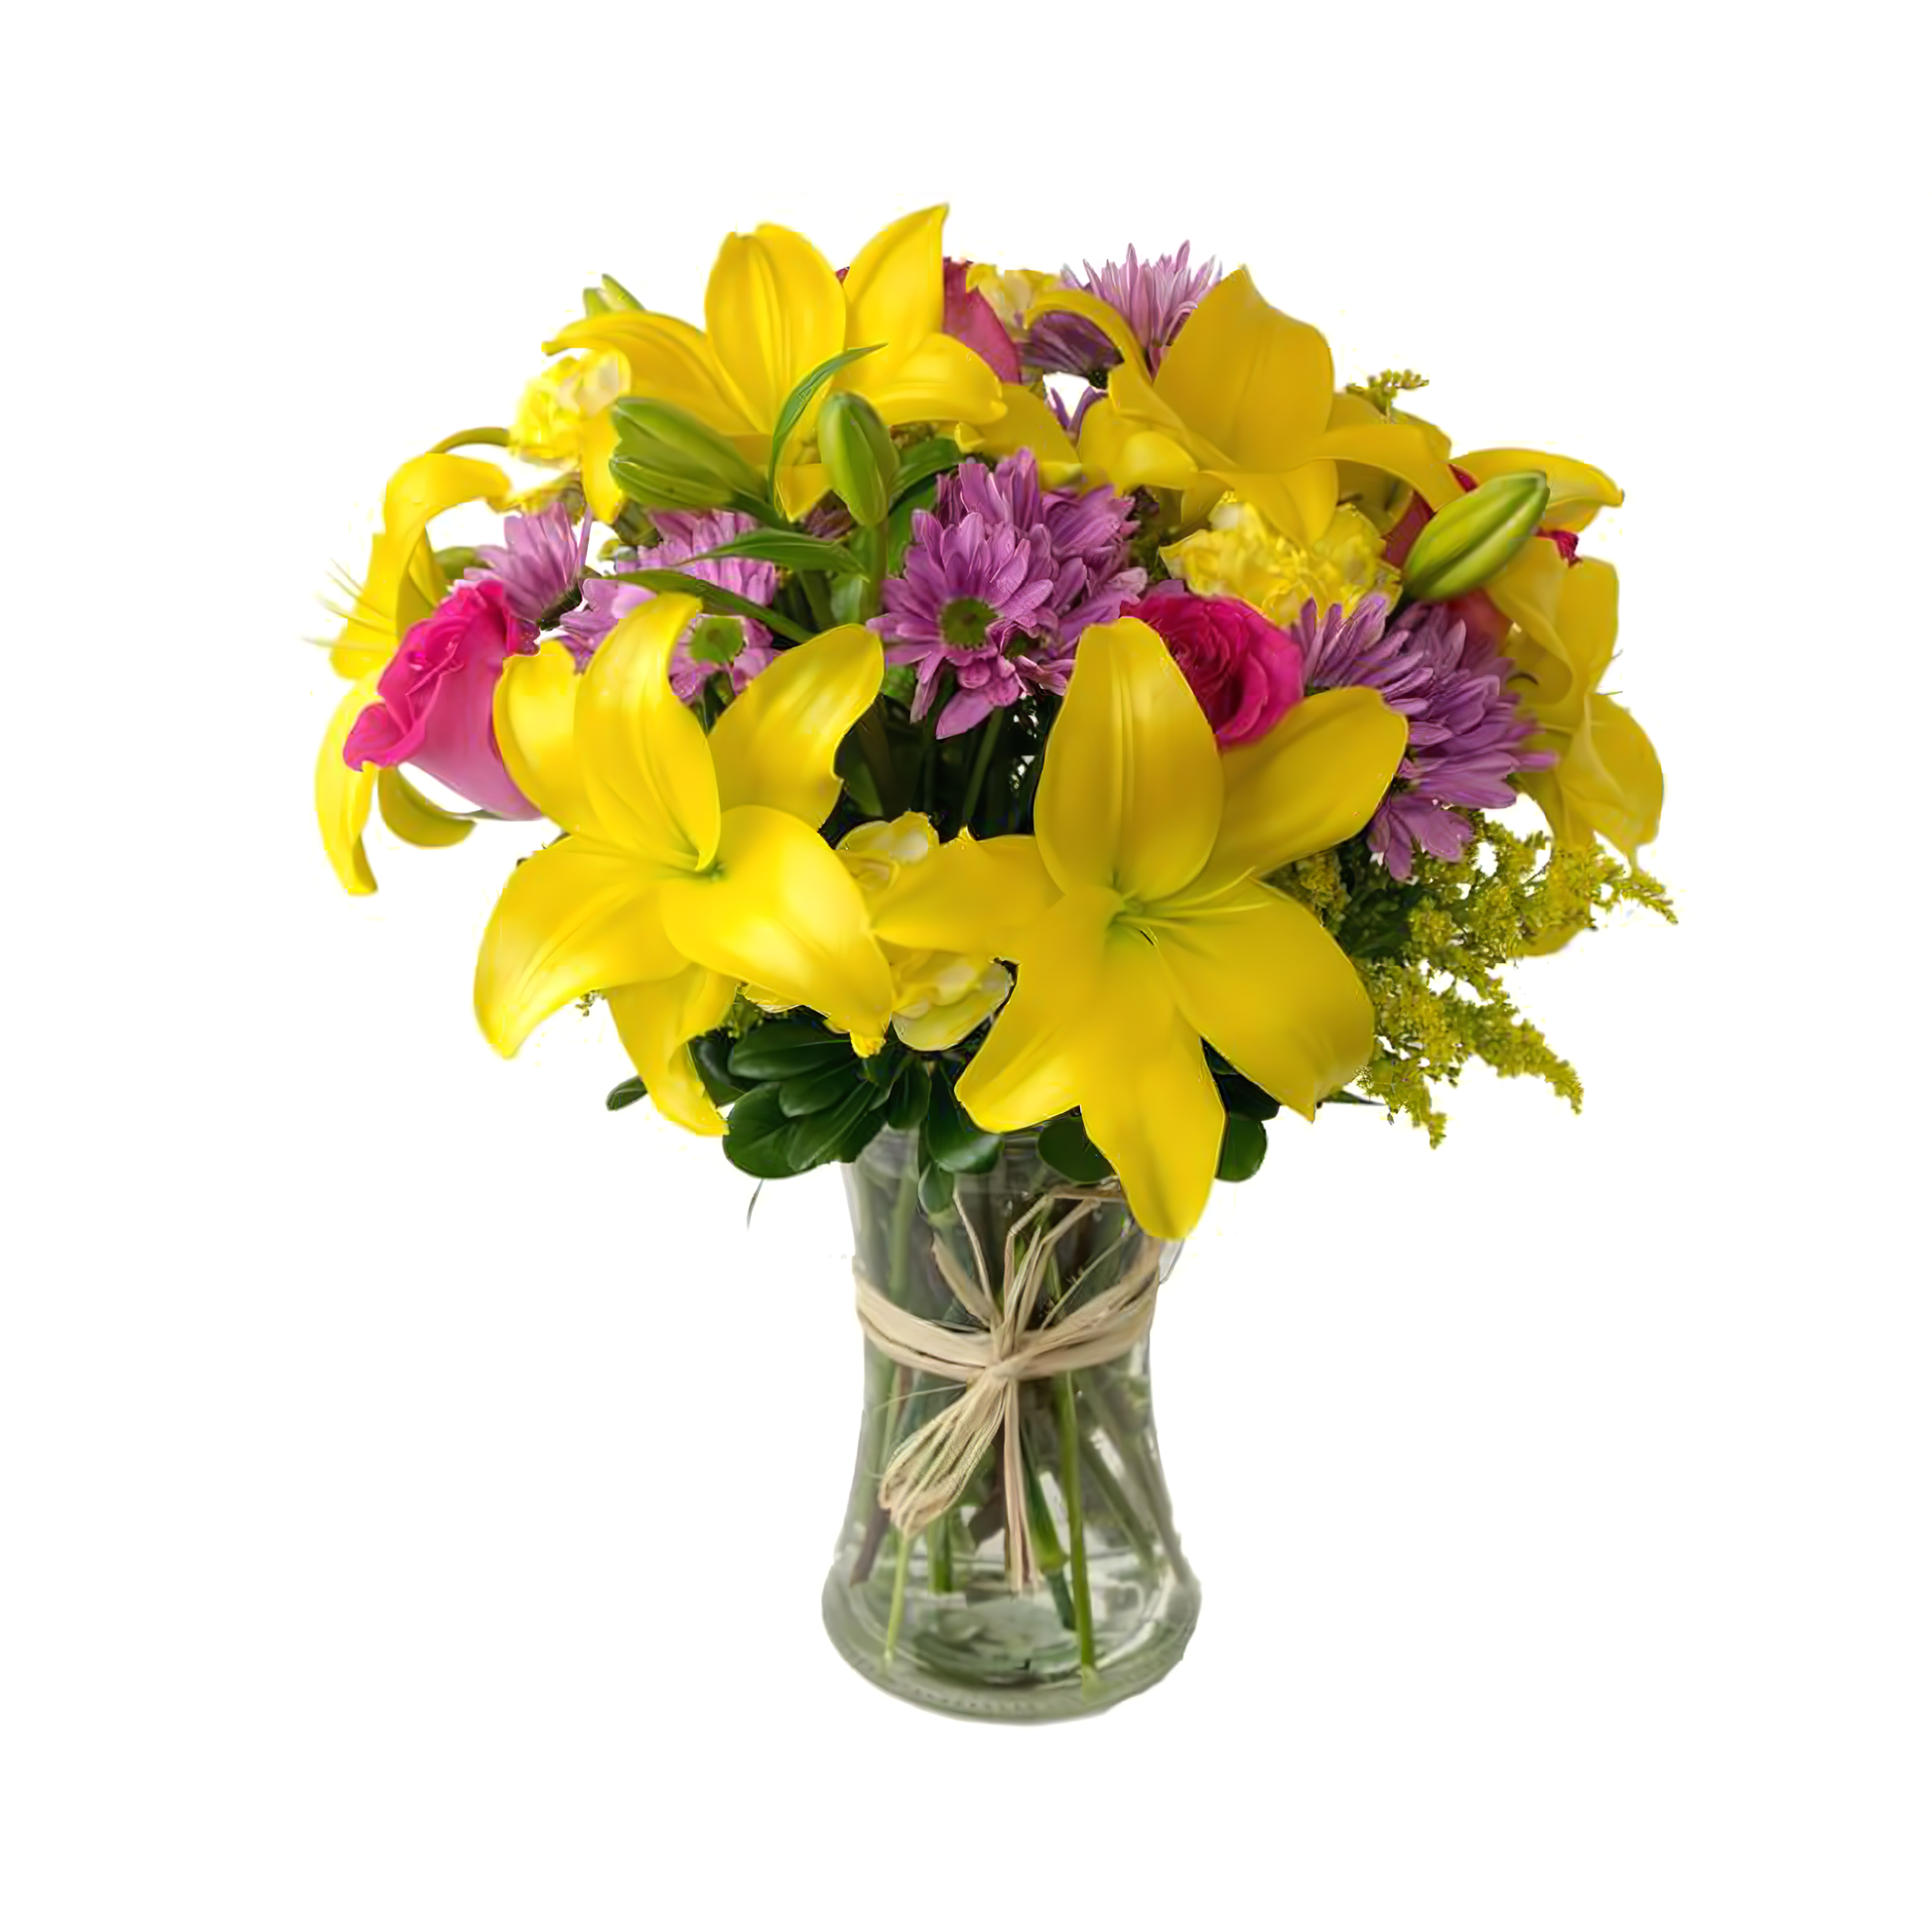 NYC Flower Delivery - Pastels Dreams - Seasonal > Mother's Day - 5/9